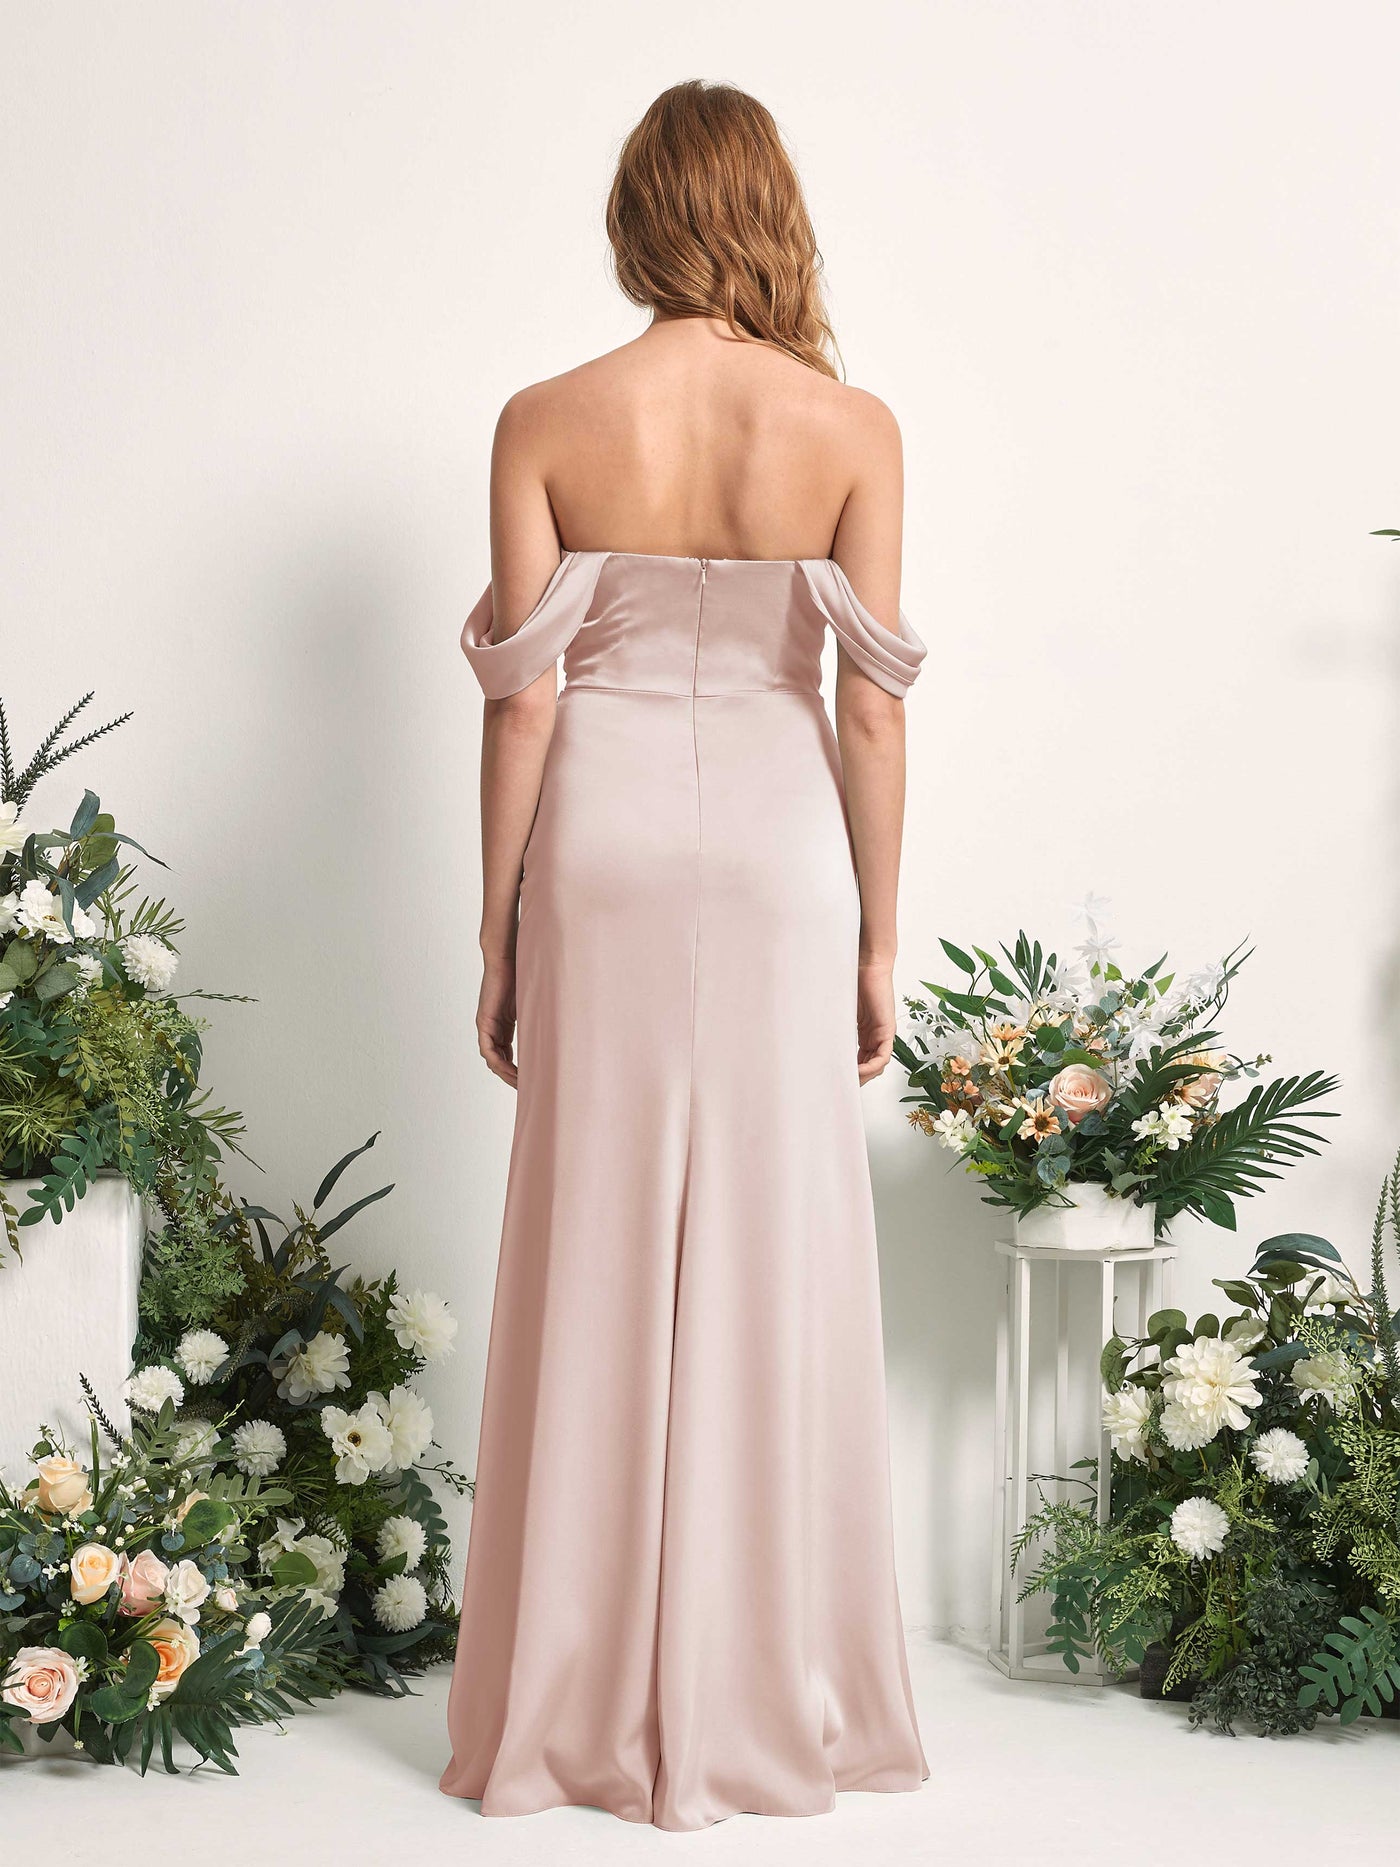 Pearl Pink Bridesmaid Dresses Bridesmaid Dress A-line Satin Off Shoulder Full Length Sleeveless Wedding Party Dress (80225210)#color_pearl-pink